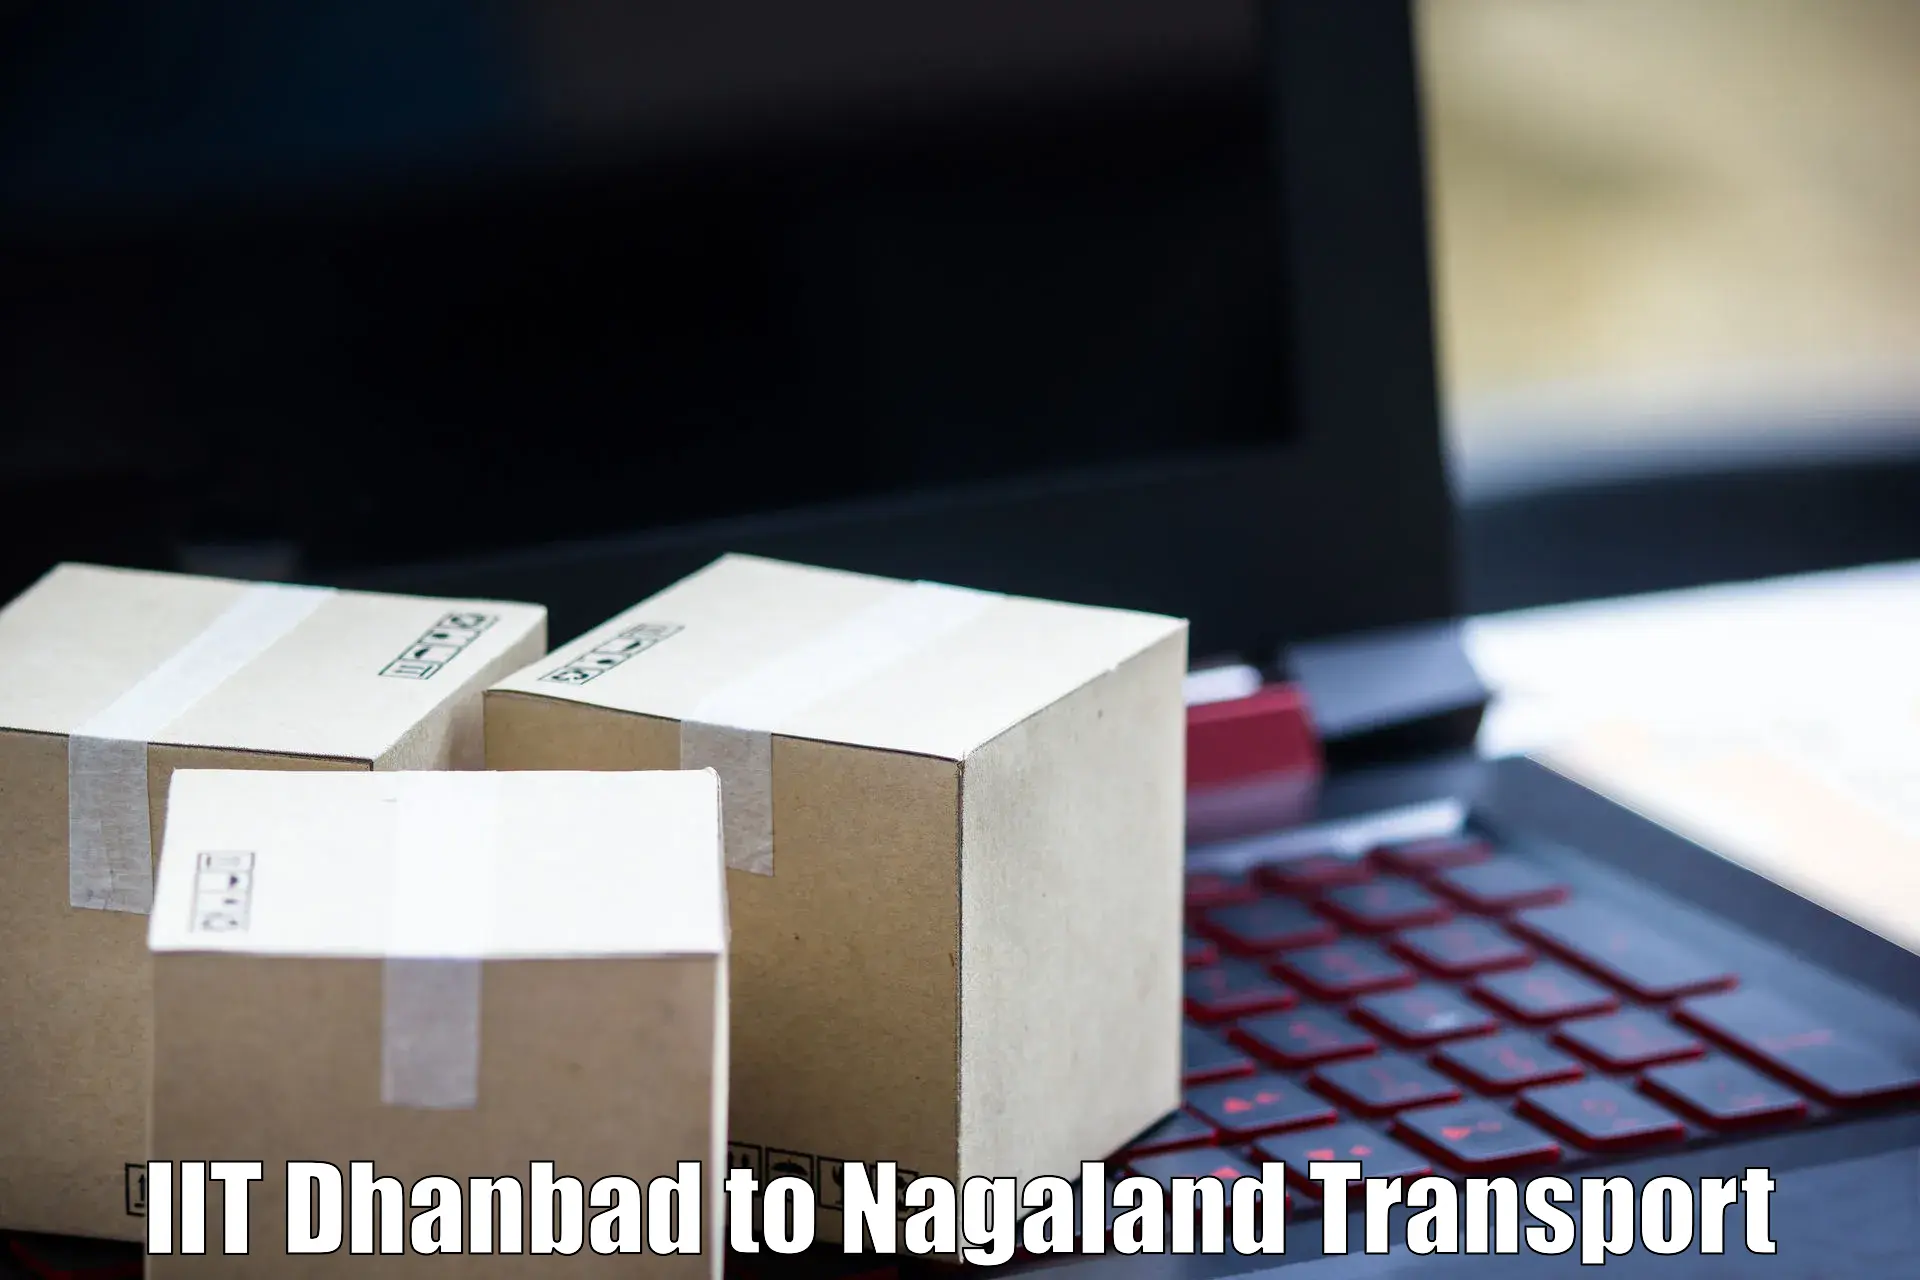 Container transport service IIT Dhanbad to Nagaland